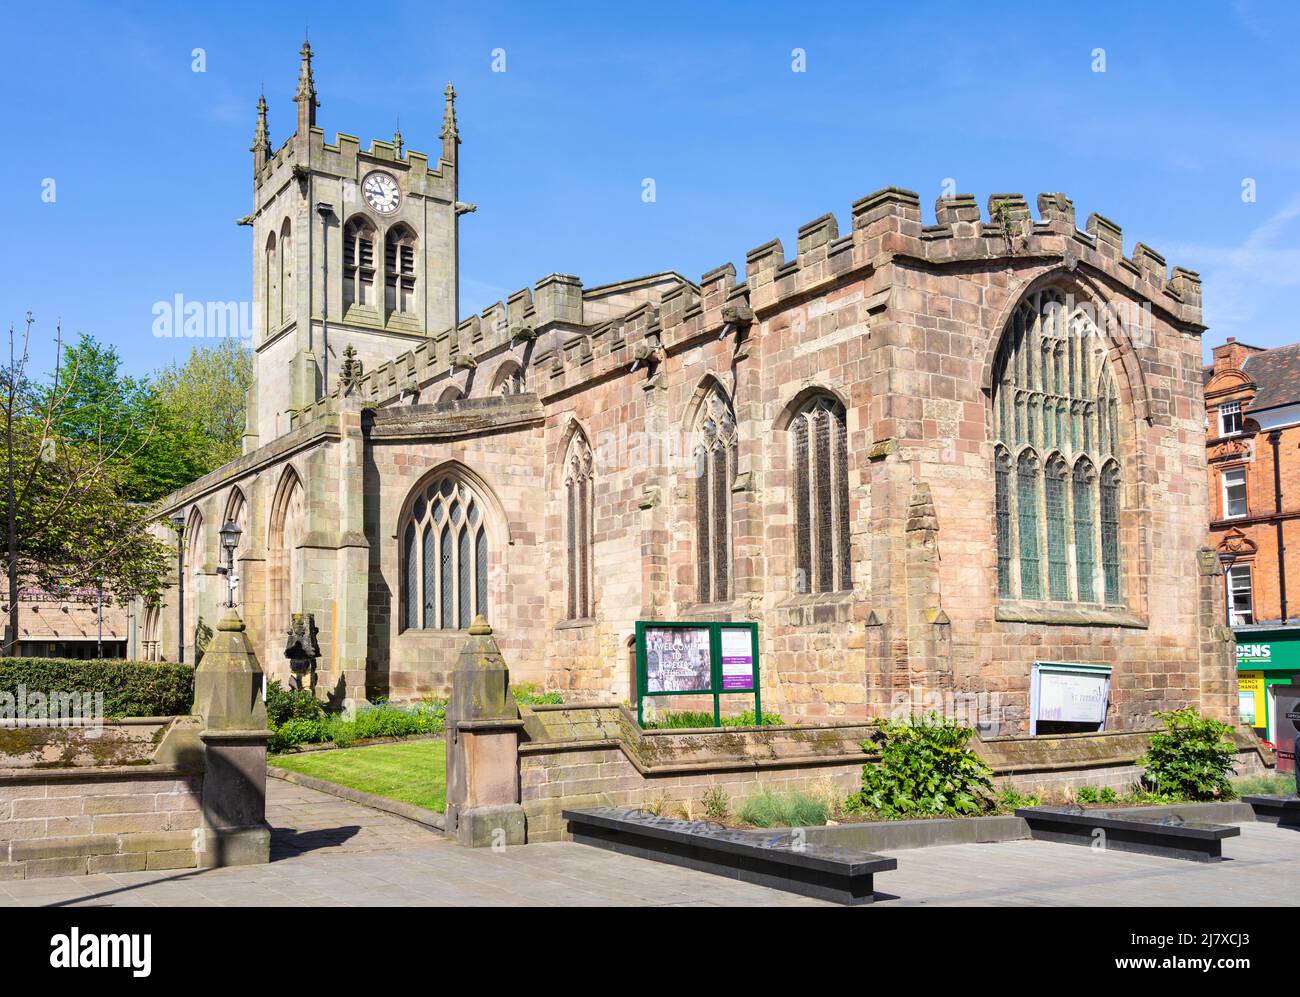 St Peter's Church or St Peter's in the City is a Church of England parish church in St Peter's Churchyard Derby city centre Derbyshire England UK GB Stock Photo